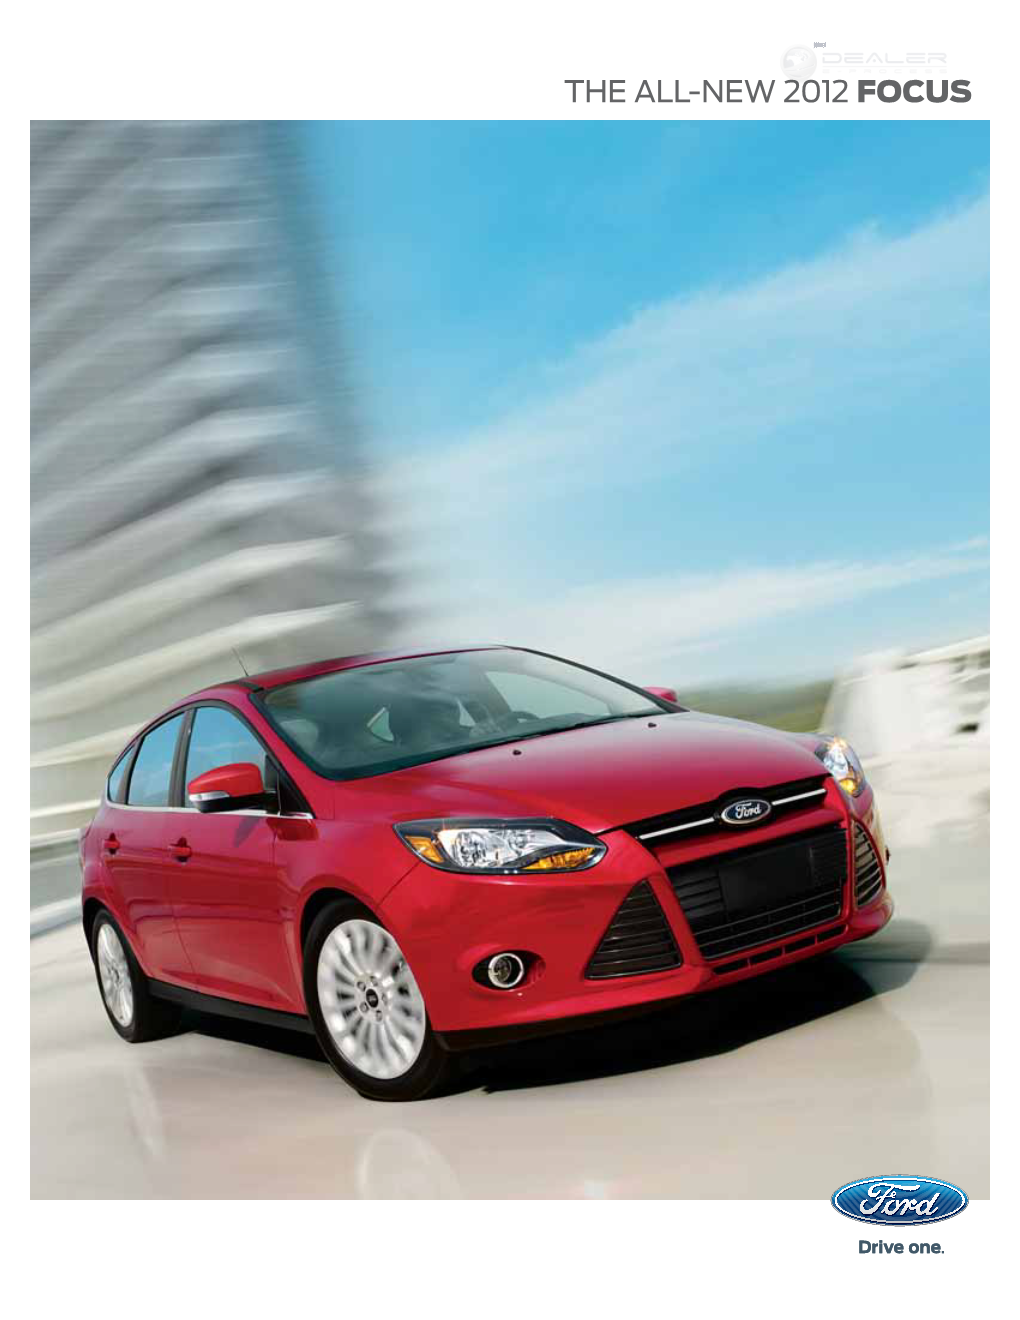 THE ALL-NEW 2012 FOCUS Information Provided By:Providedinformation